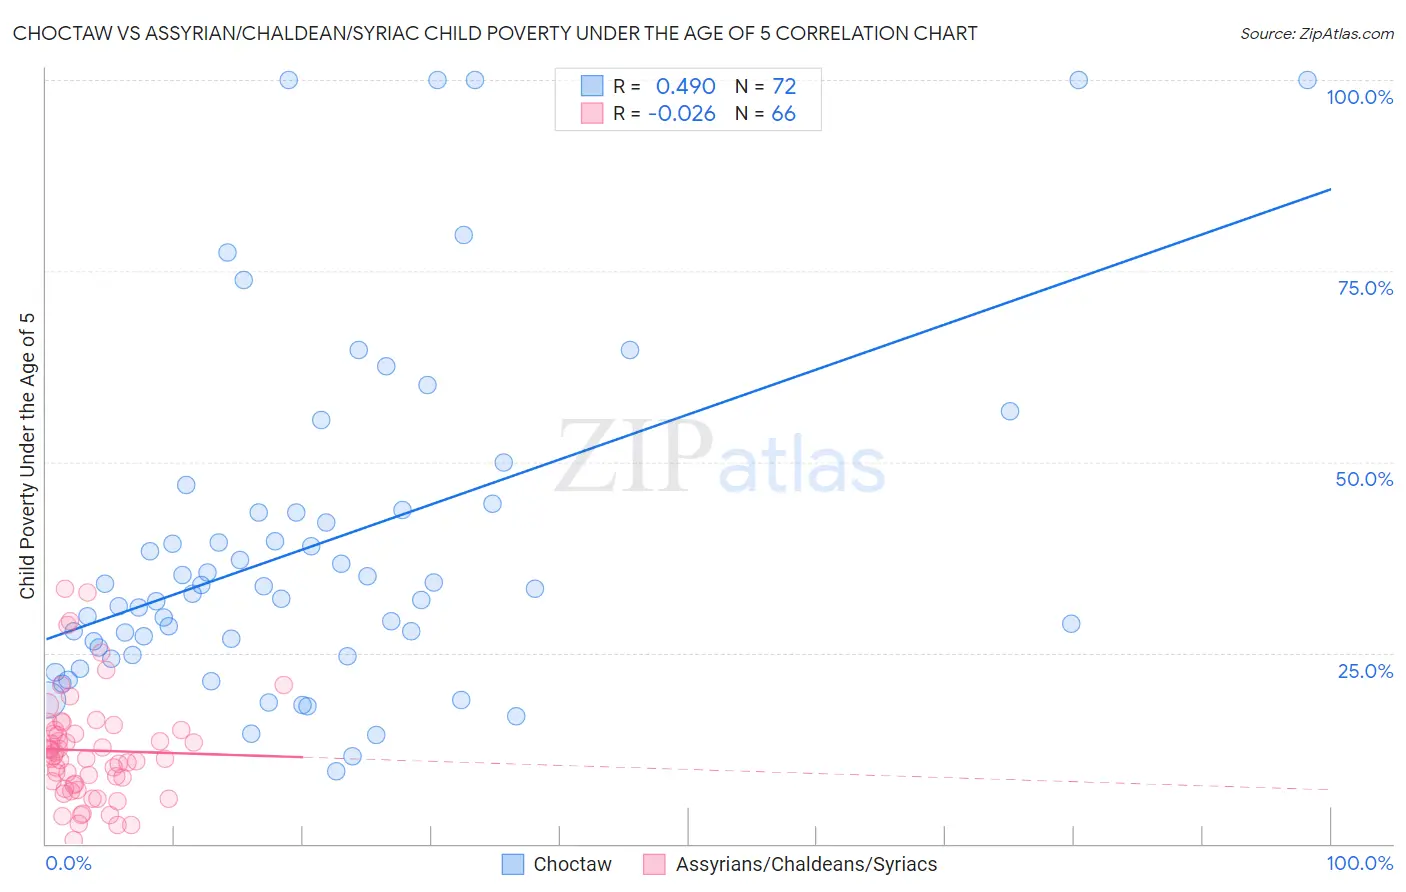 Choctaw vs Assyrian/Chaldean/Syriac Child Poverty Under the Age of 5